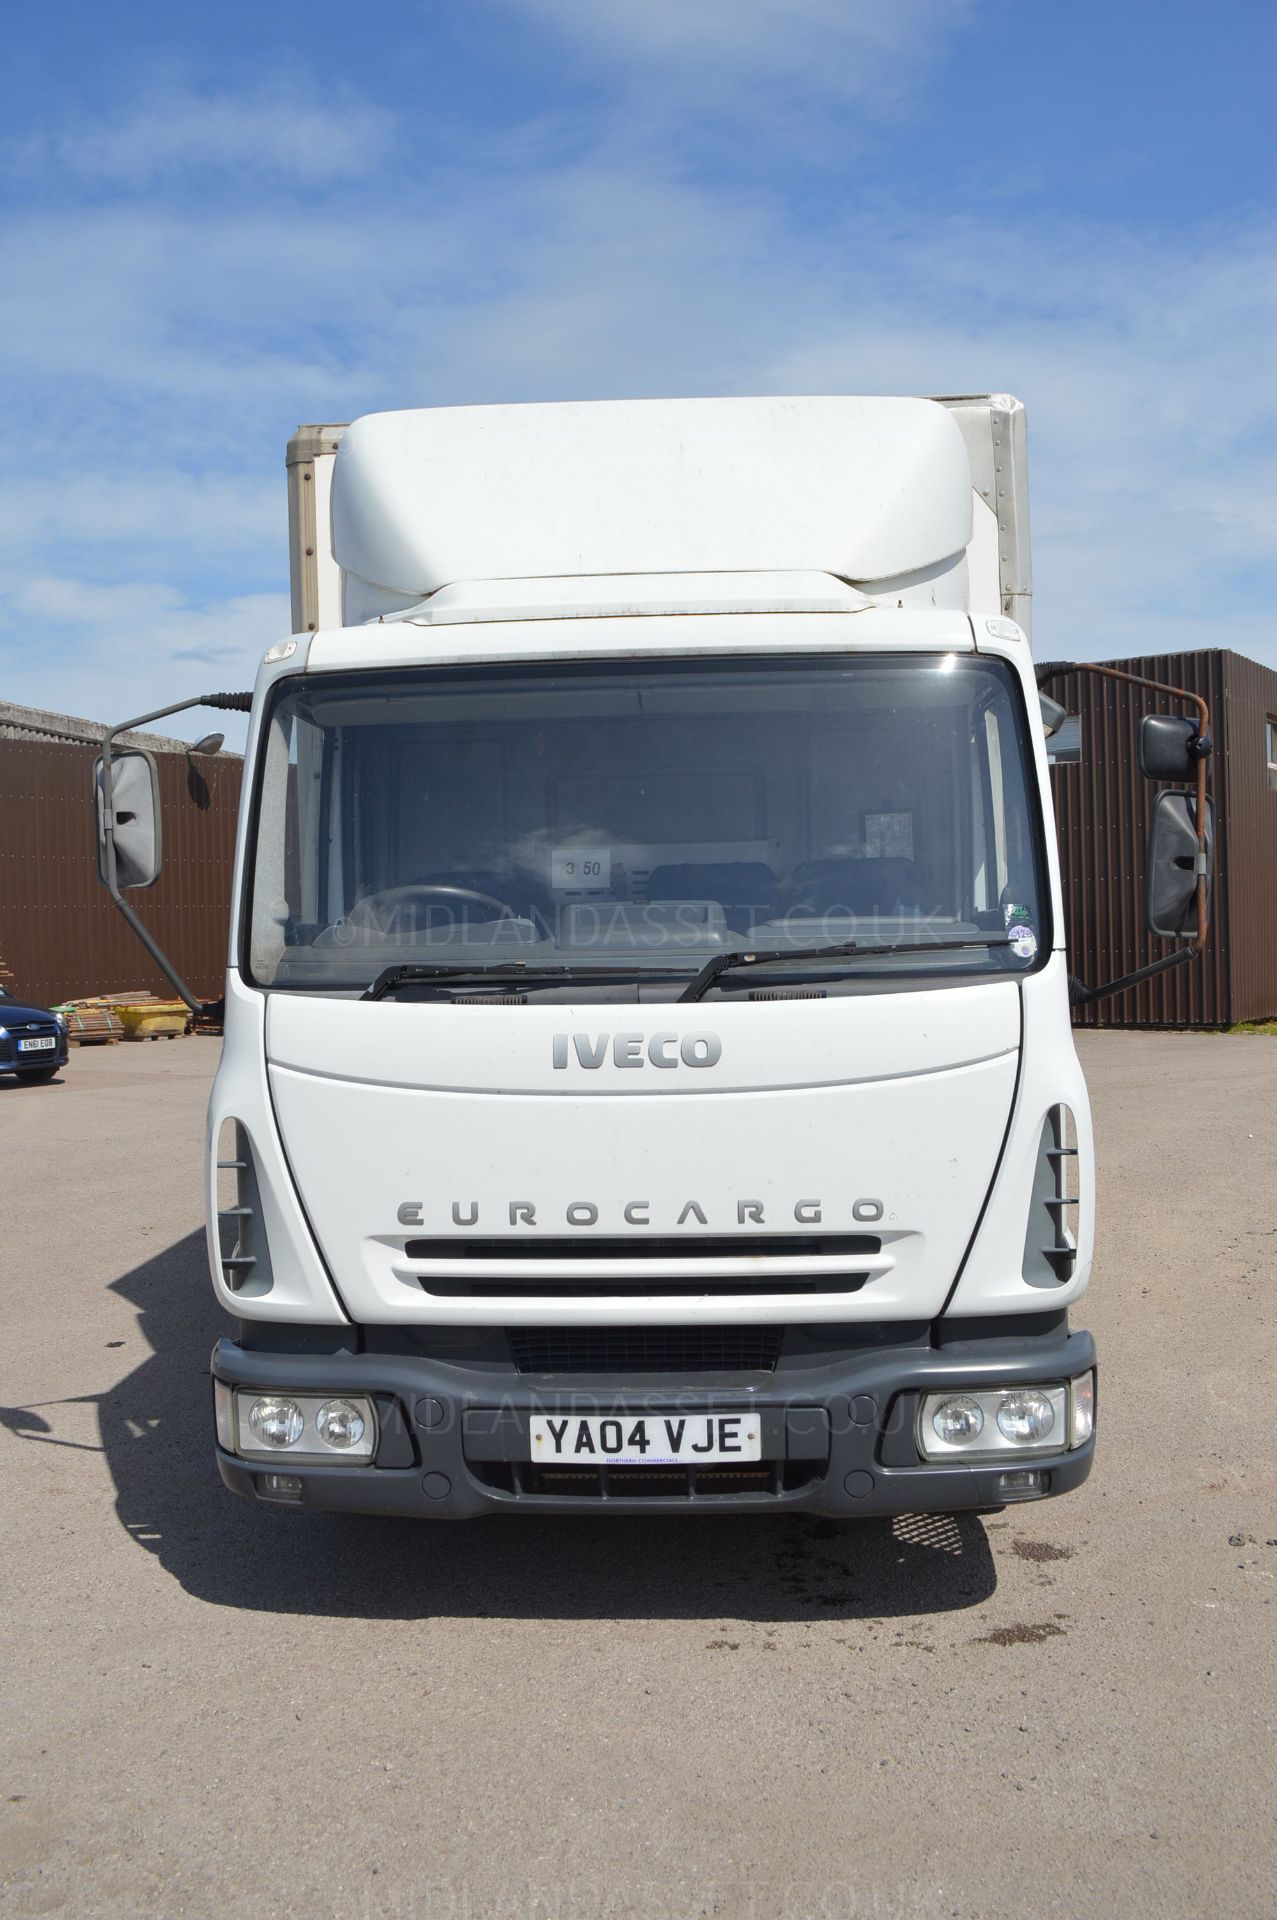 2004/04 REG IVECO EUROCARGO 75E17 BOX VAN WITH TAIL LIFT - Image 2 of 20